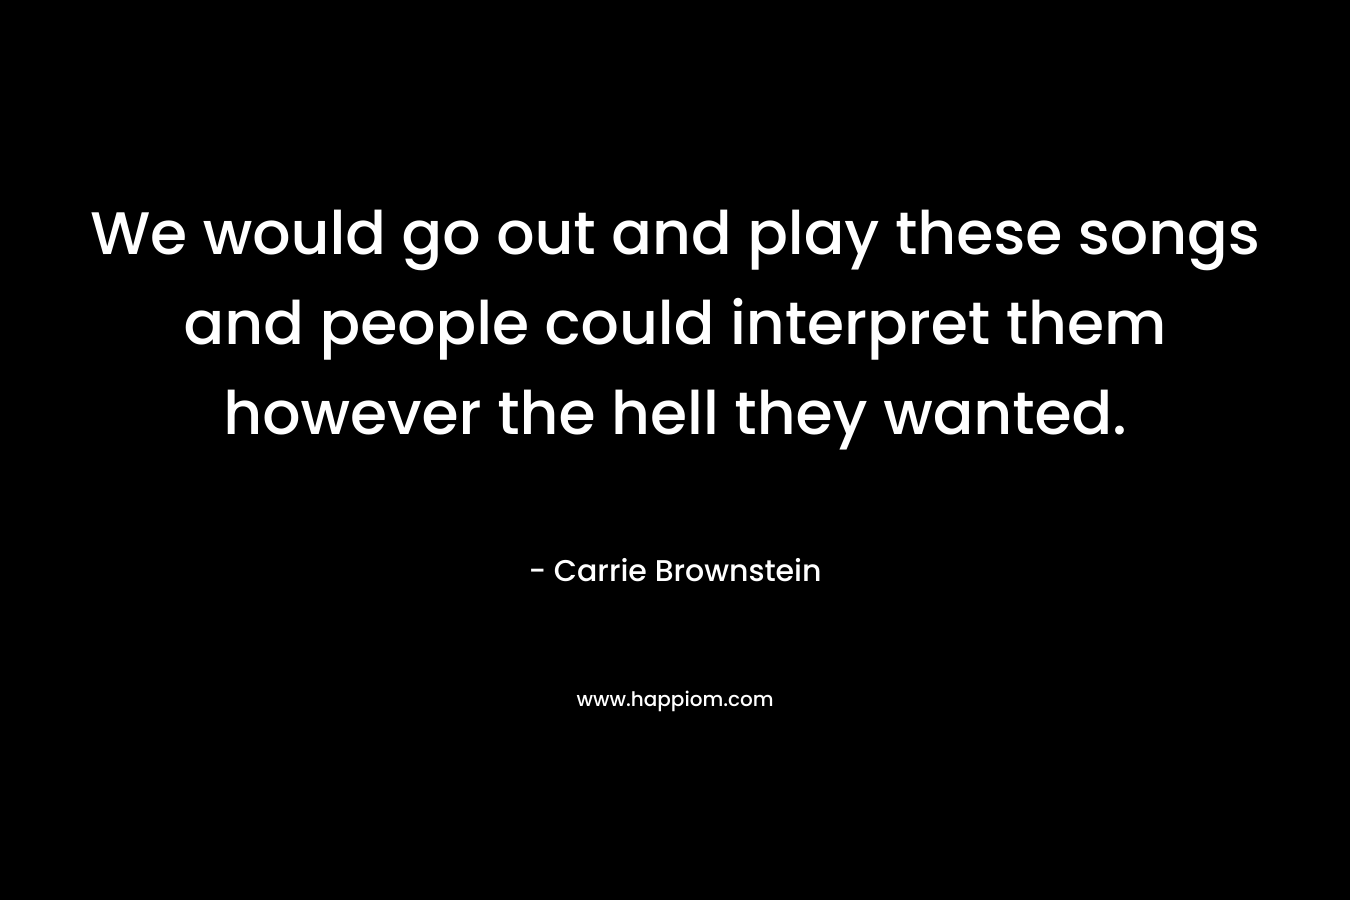 We would go out and play these songs and people could interpret them however the hell they wanted. – Carrie Brownstein